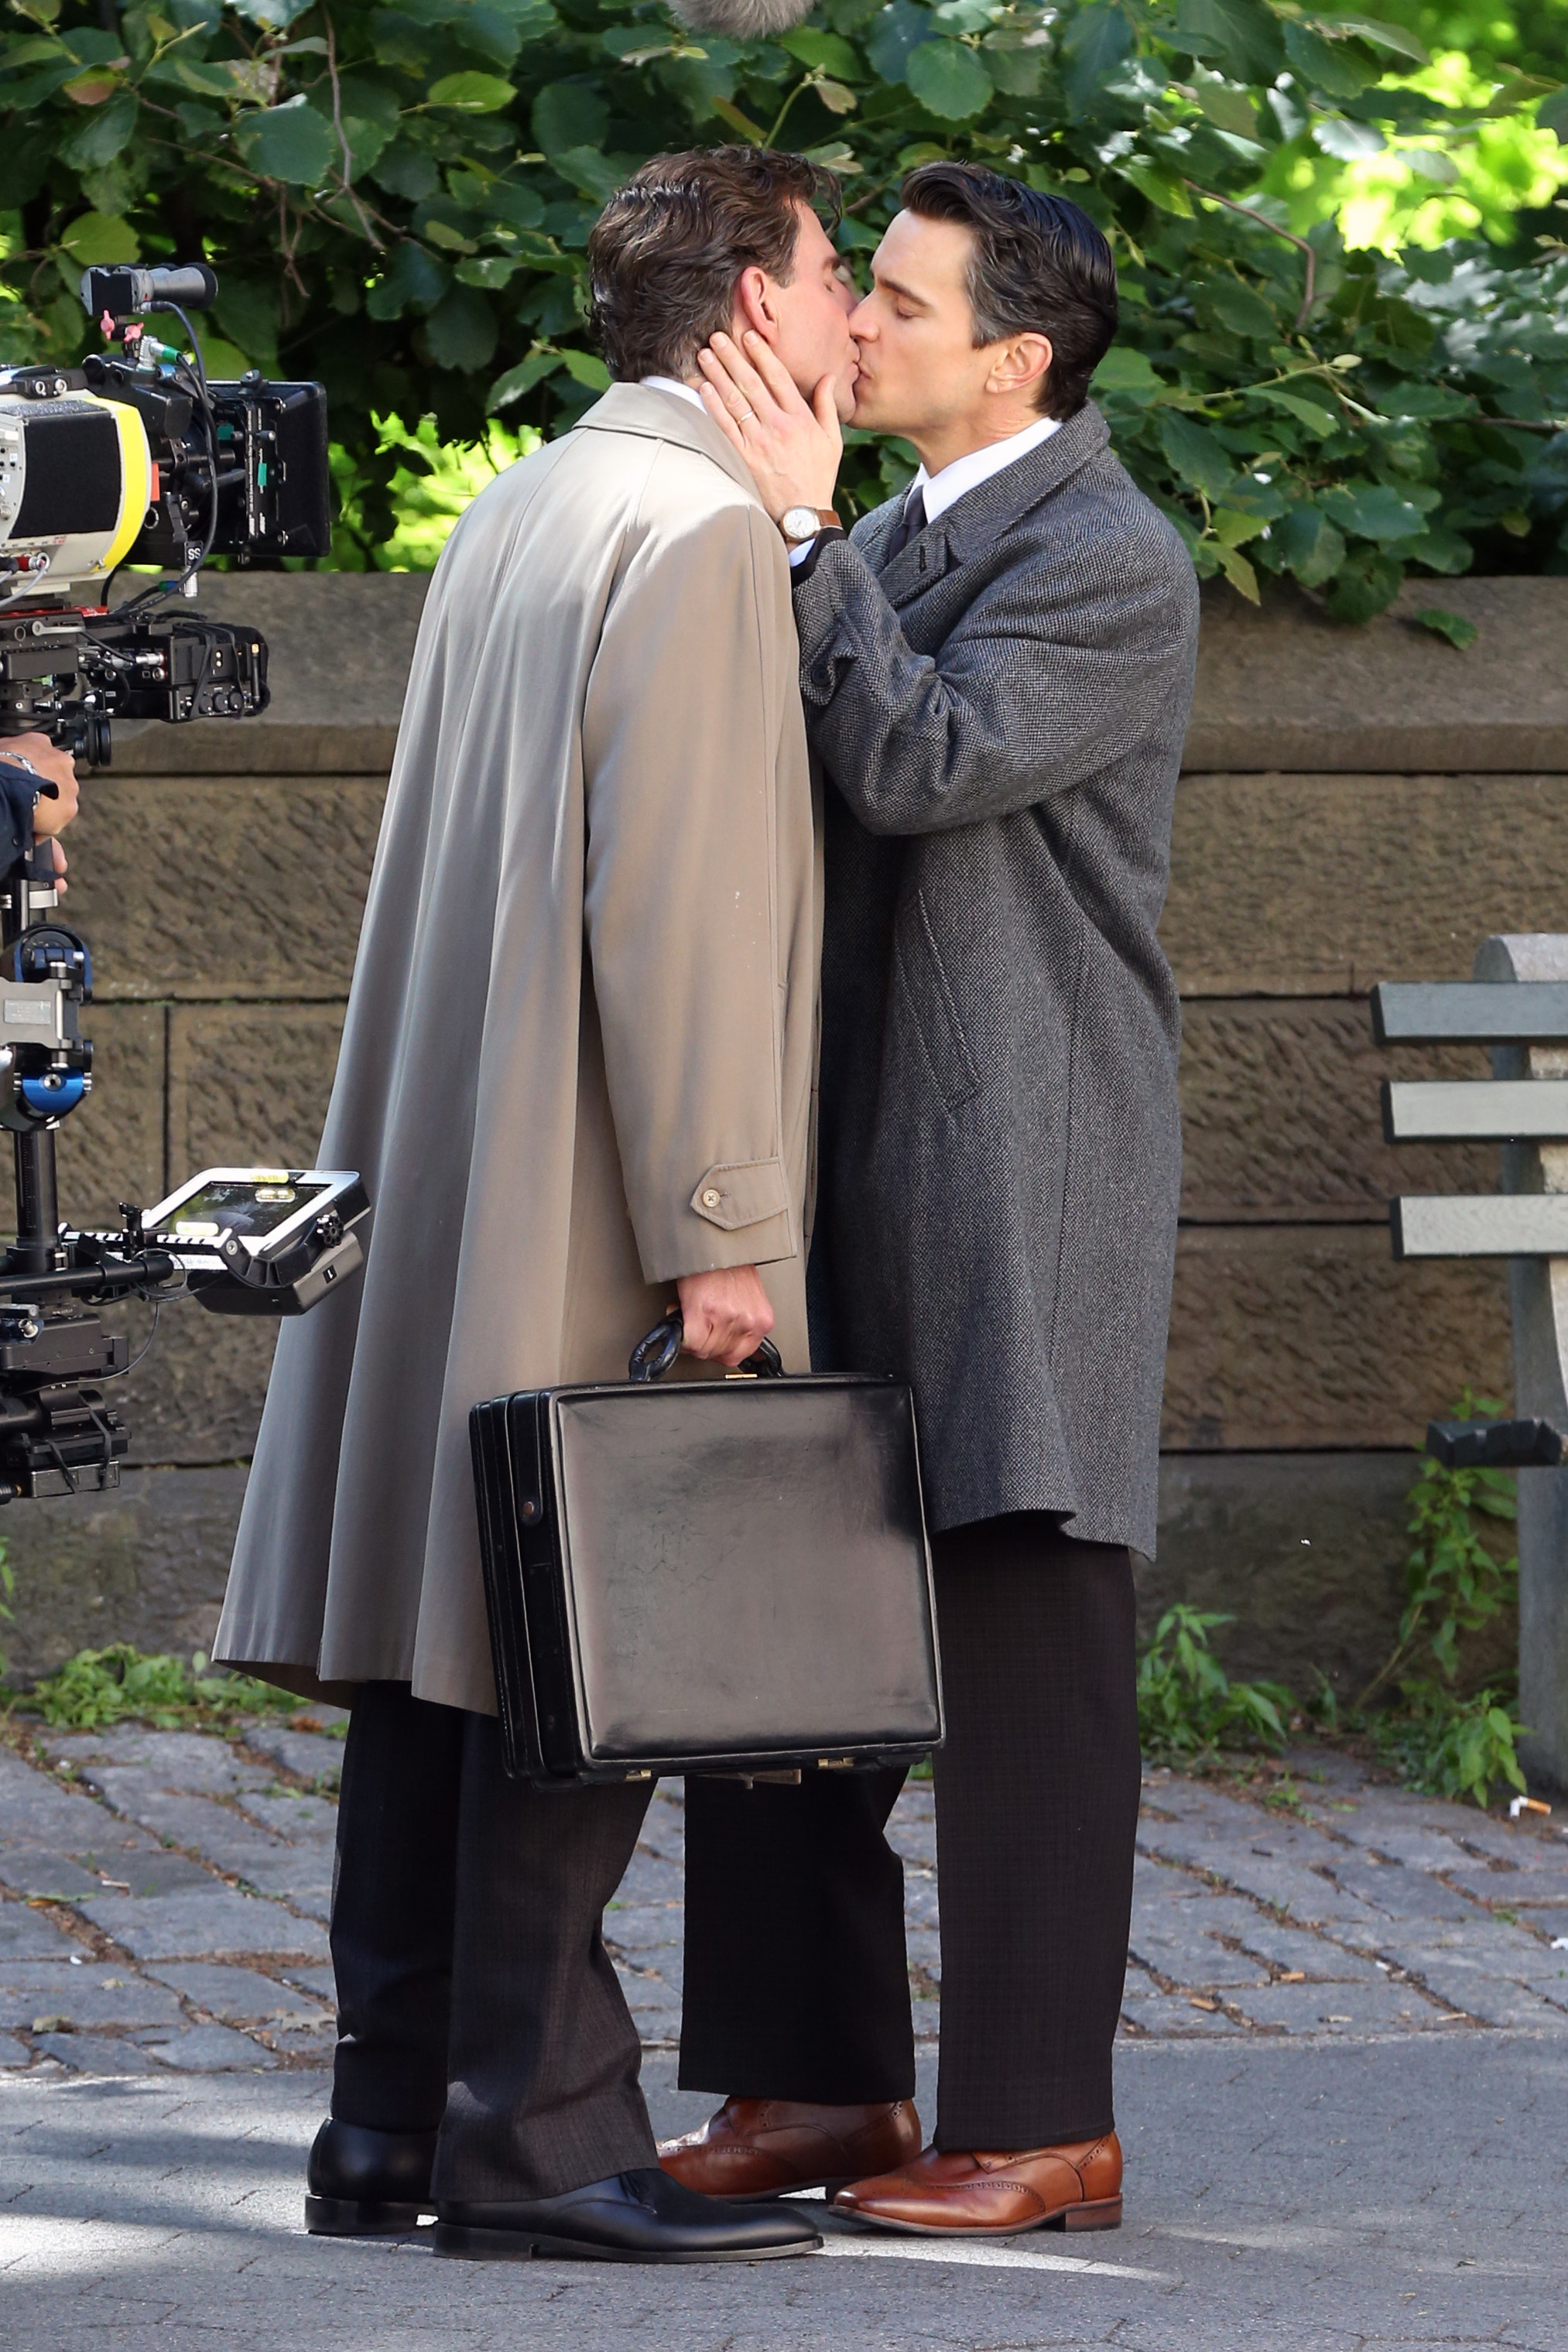 Matt holds Bradley&#x27;s face as they kiss while standing on a sidewalk and Bradley holds a briefcase